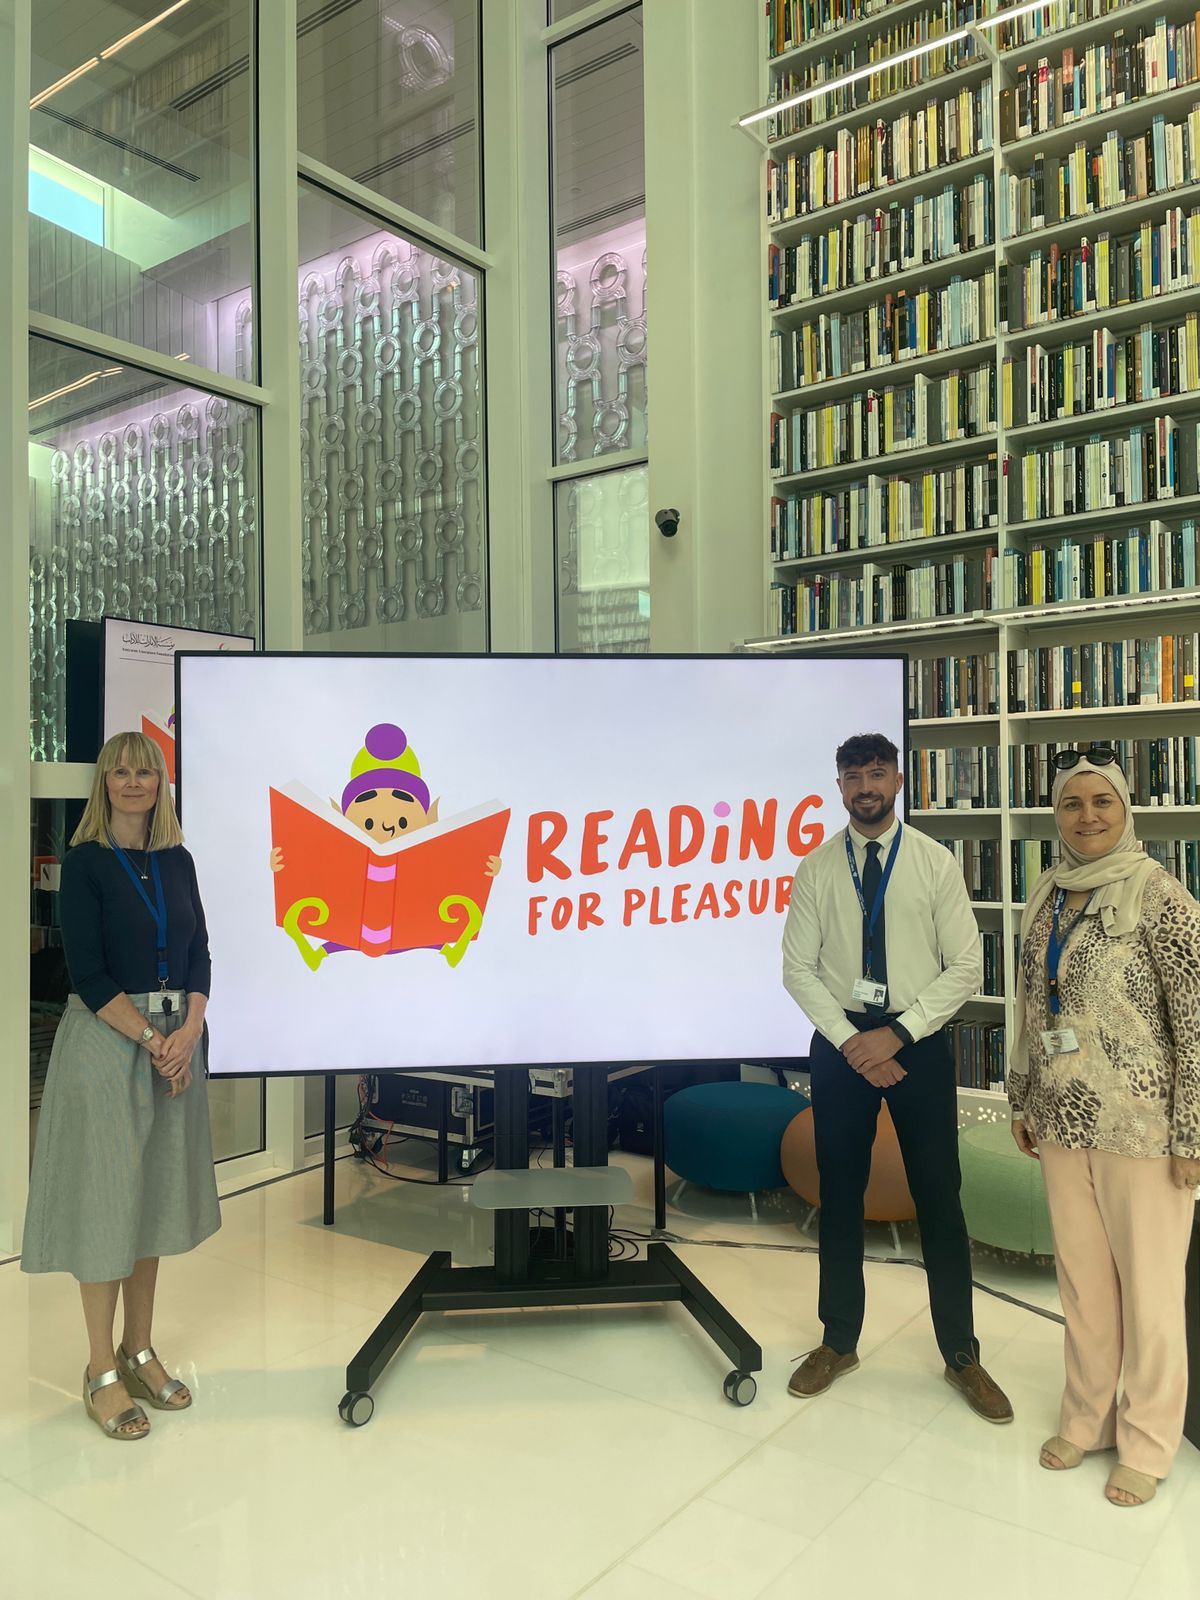 Dubai Heights Academy Selected as 1 of just 6 Schools for the Emirates Literature Foundation's New Initiative